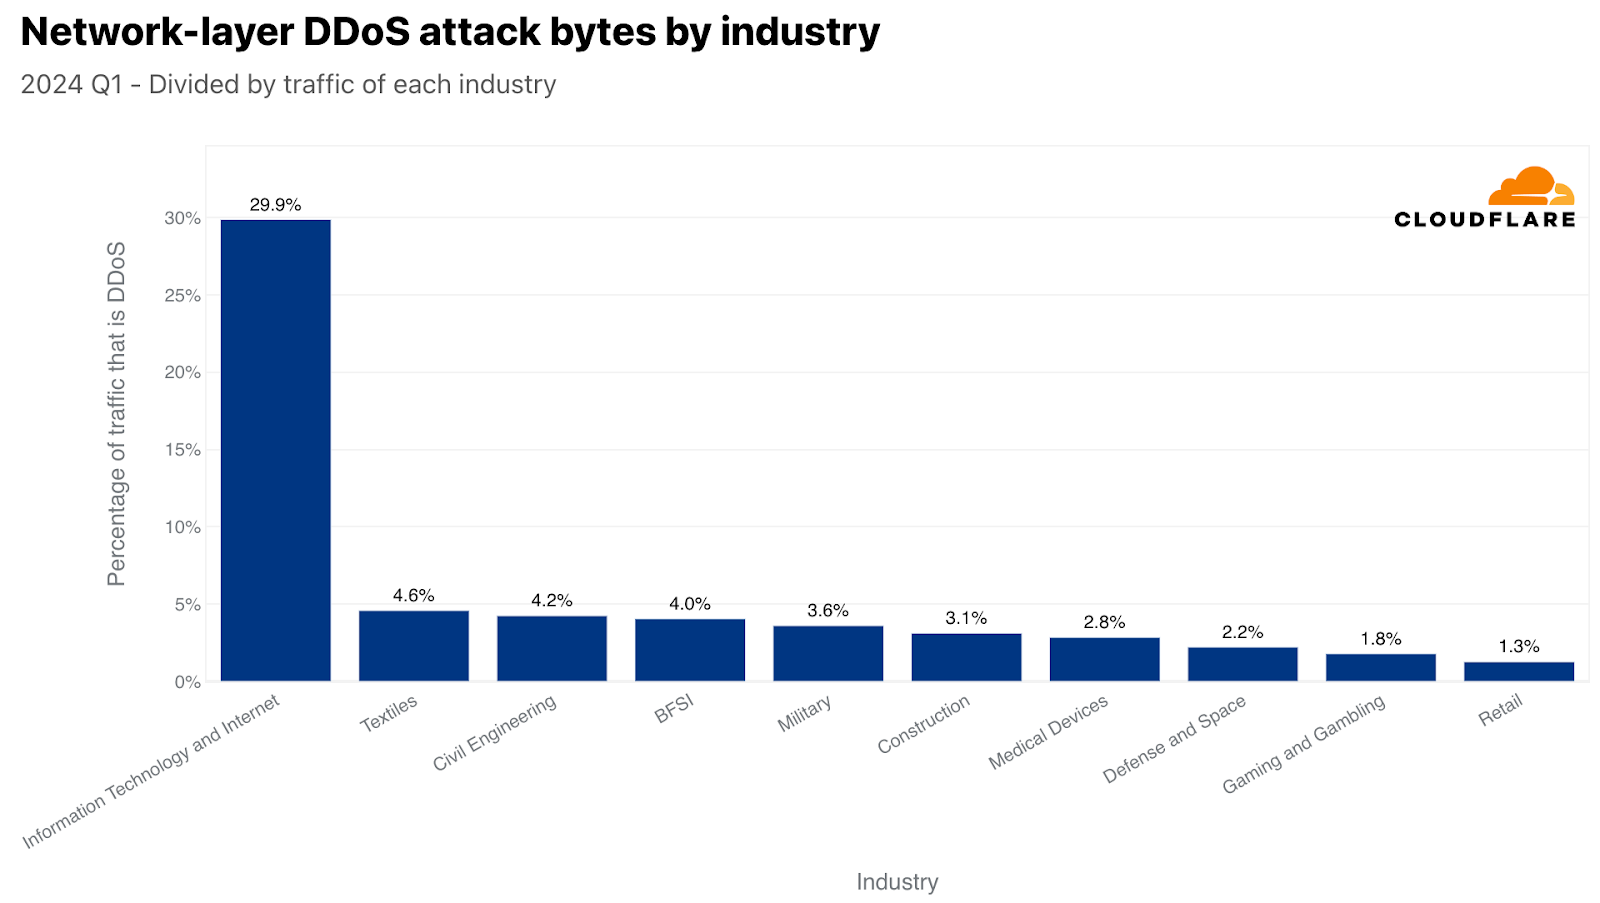 Top attacked industries by L3/4 DDoS attacks (normalized)